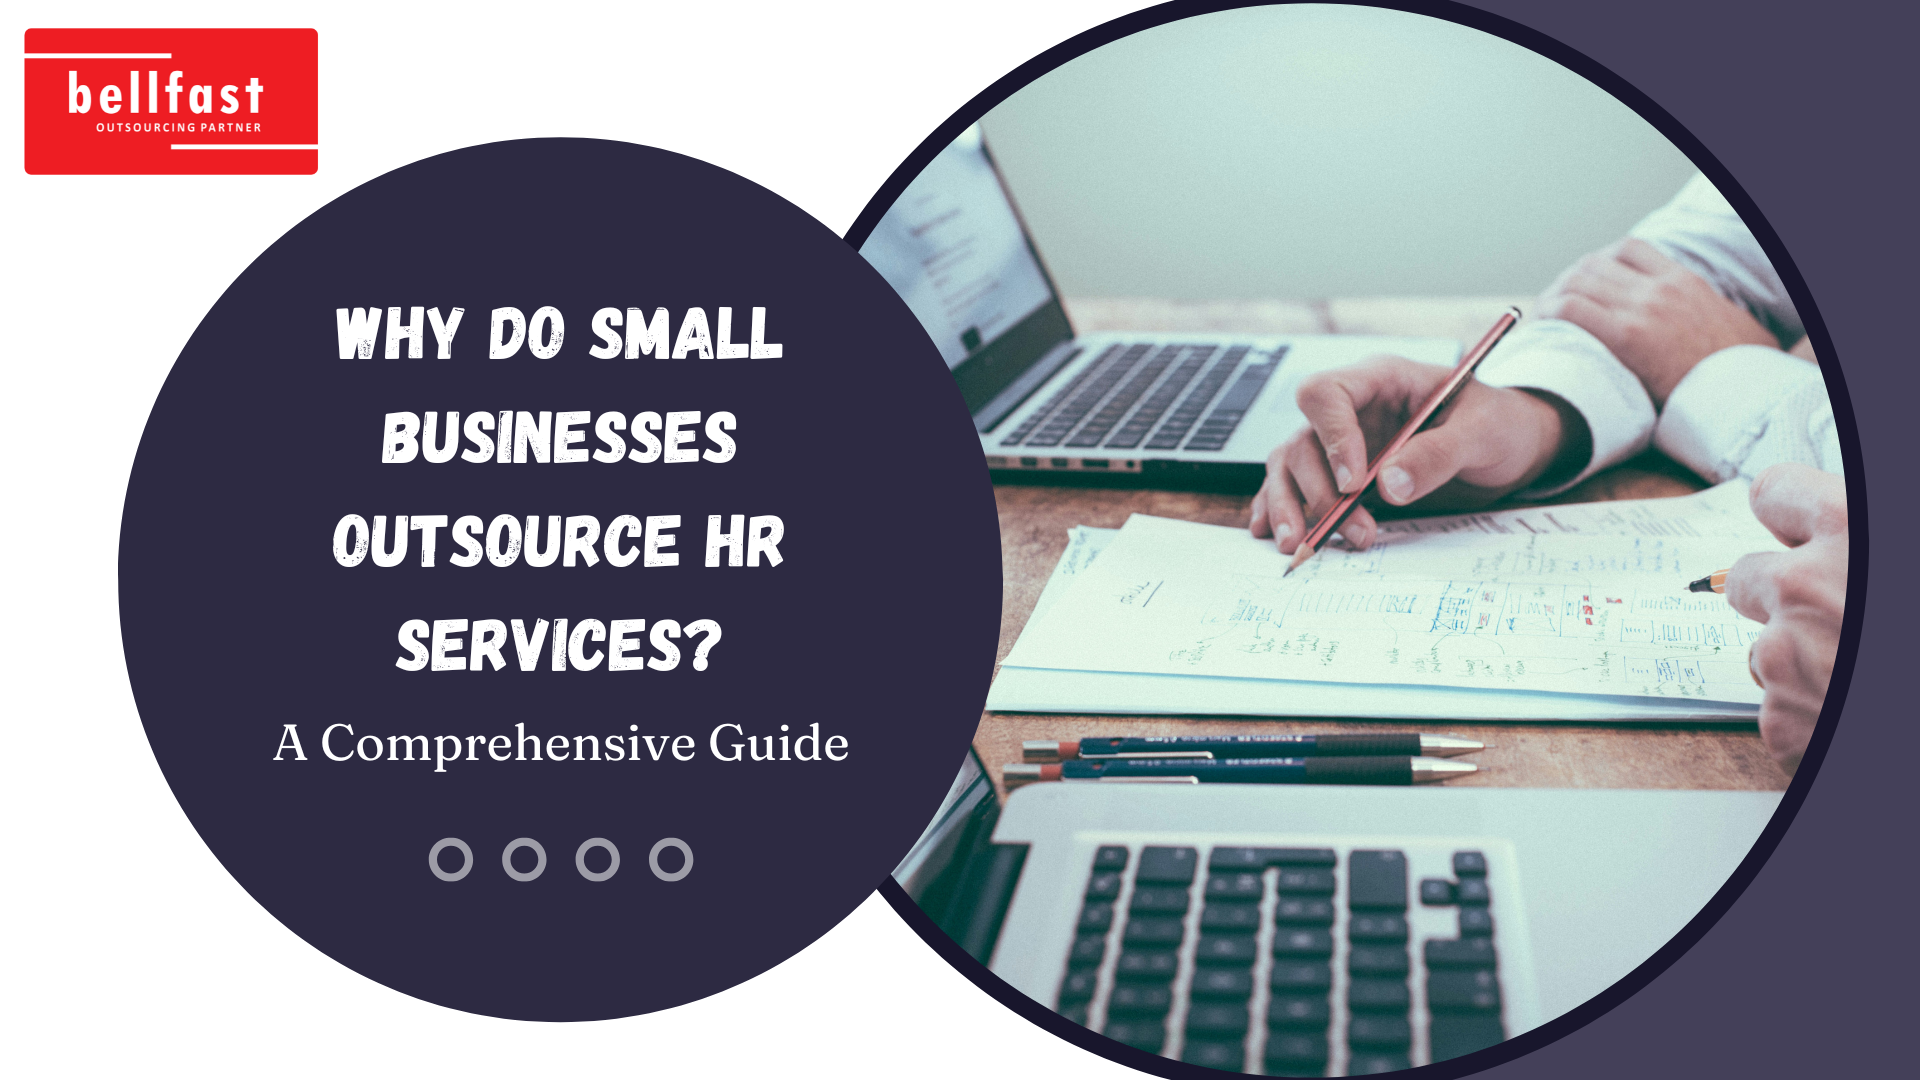 Why Do Small Businesses Outsource HR Services